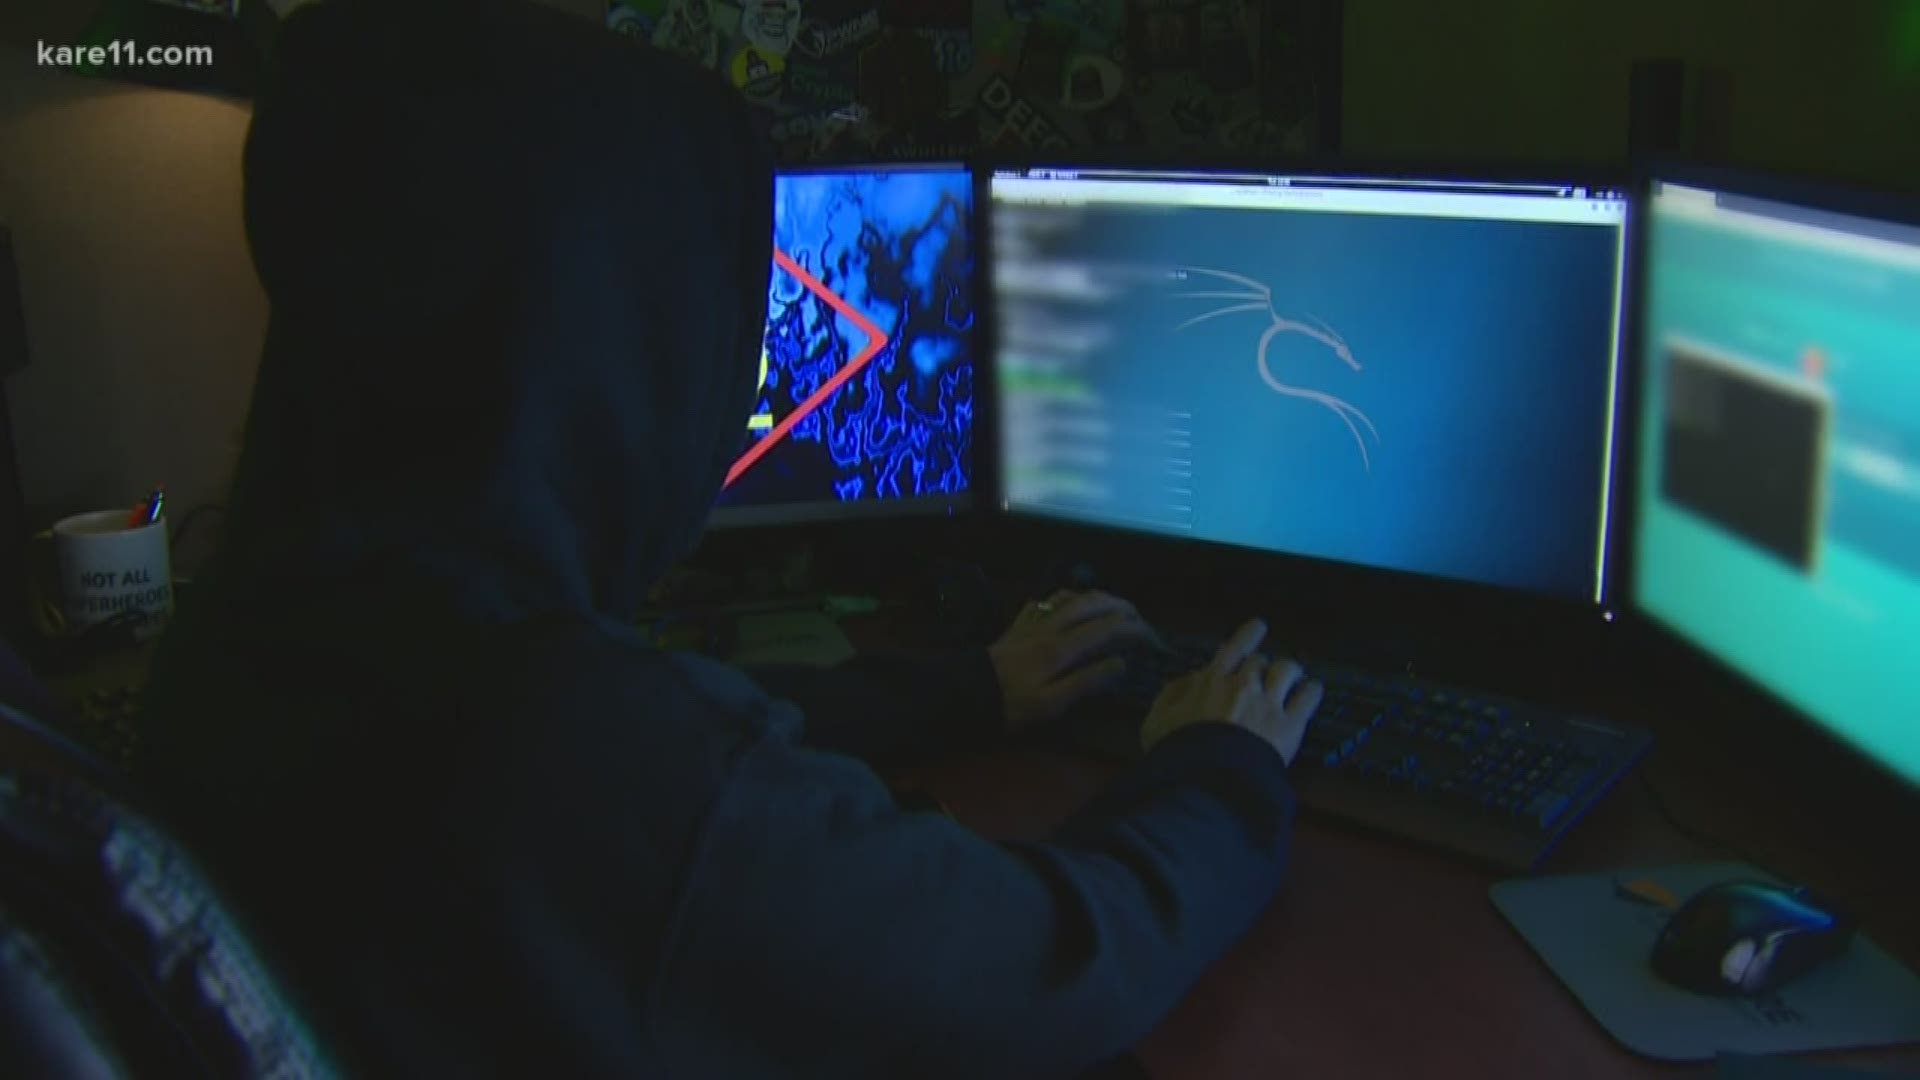 Concerns about personal security are at all-time highs, but believe it or not - there are "good guy hackers" out there. KARE 11's Chris Hrapsky introduces us to some Monday at 10 p.m.